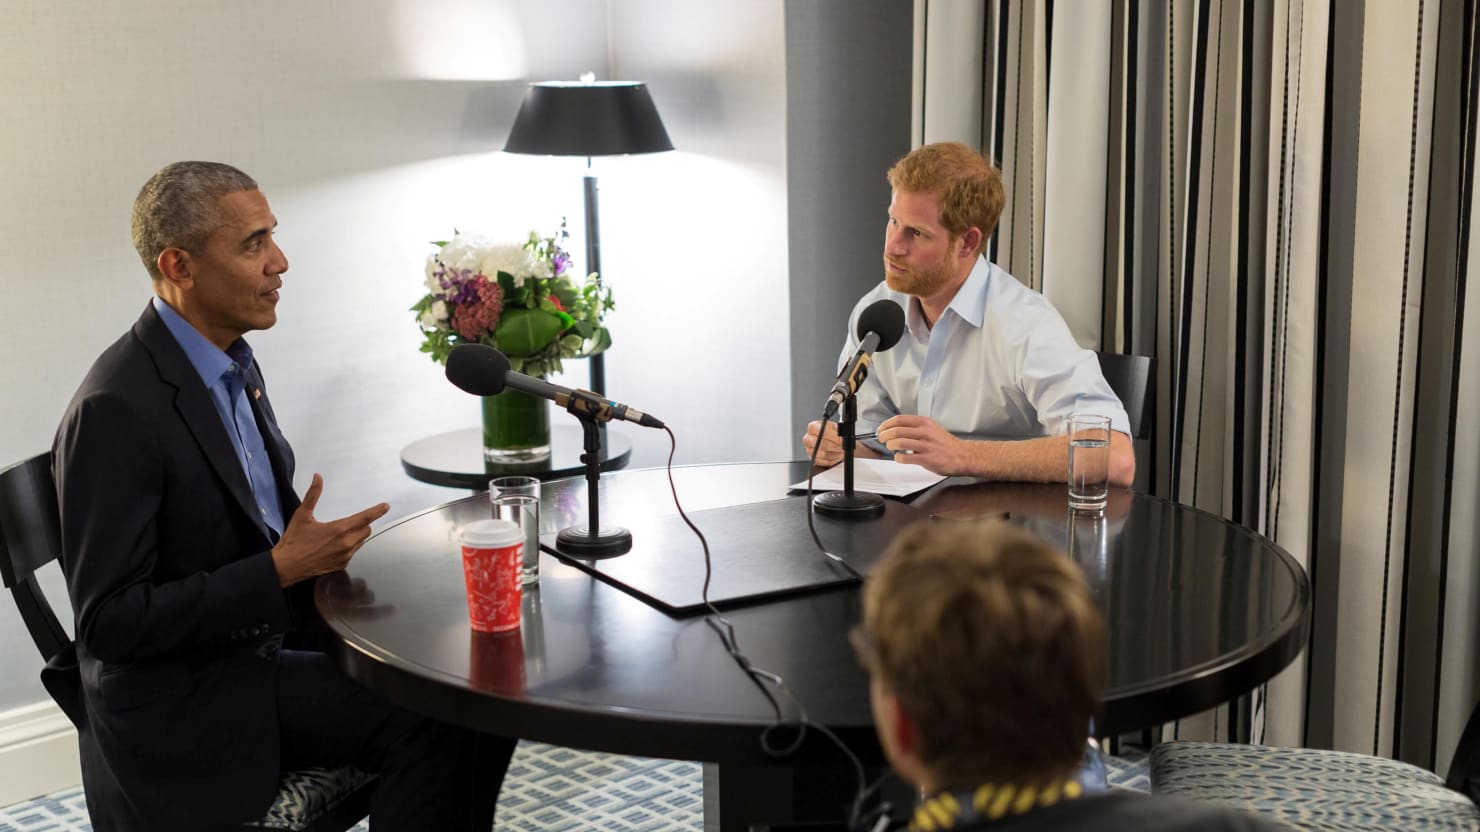 5 Gems We Took Away From Barack Obama's Interview With Prince Harry
